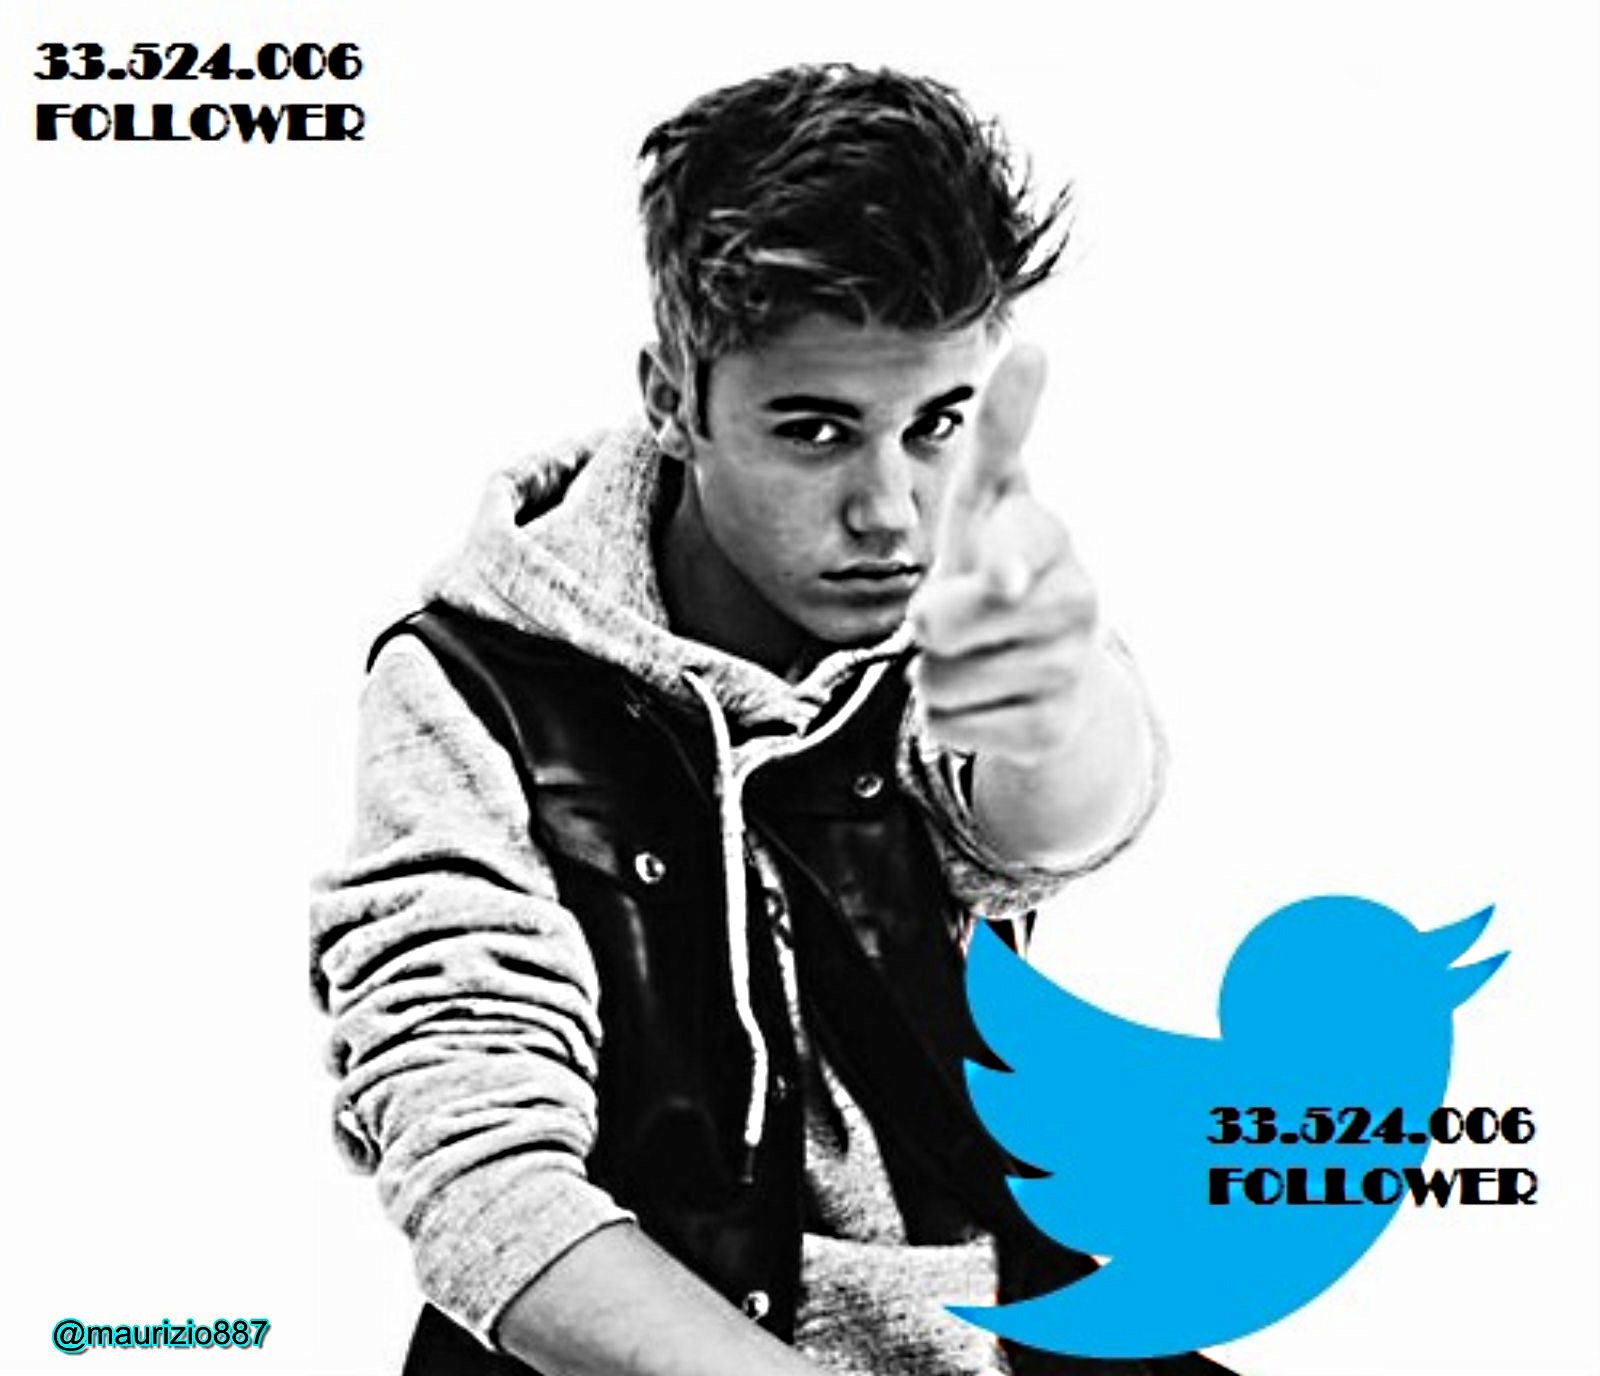 bieber THE Special One on twitter - Justin Bieber Photo (33429968) - Fanpop